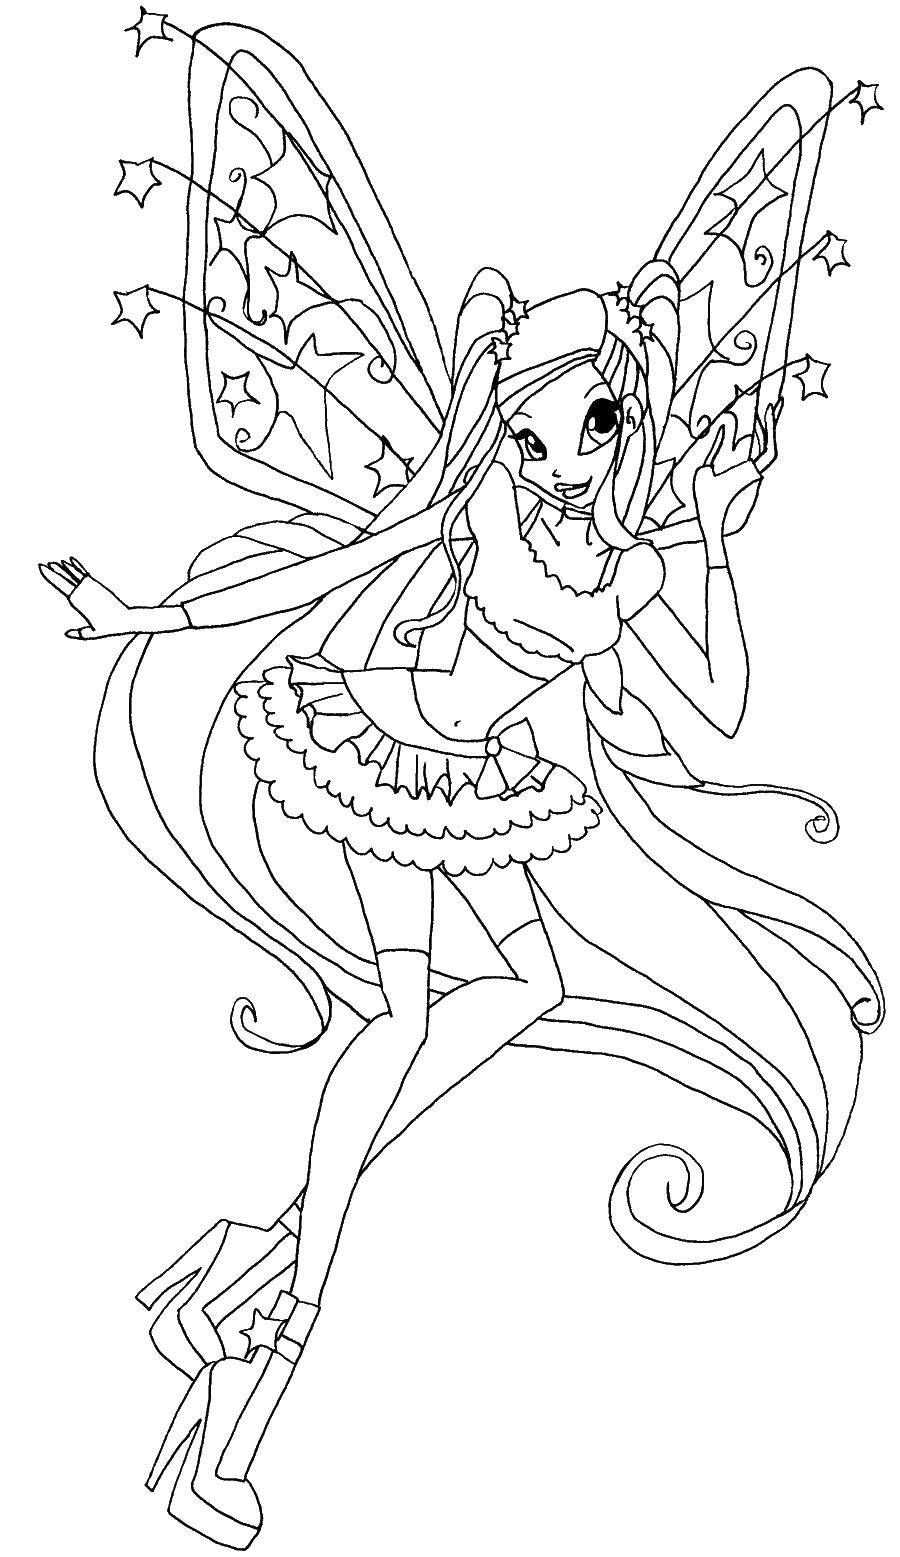 Coloring Stella from winx club blaniks. Category Winx. Tags:  Winx, Fairies.